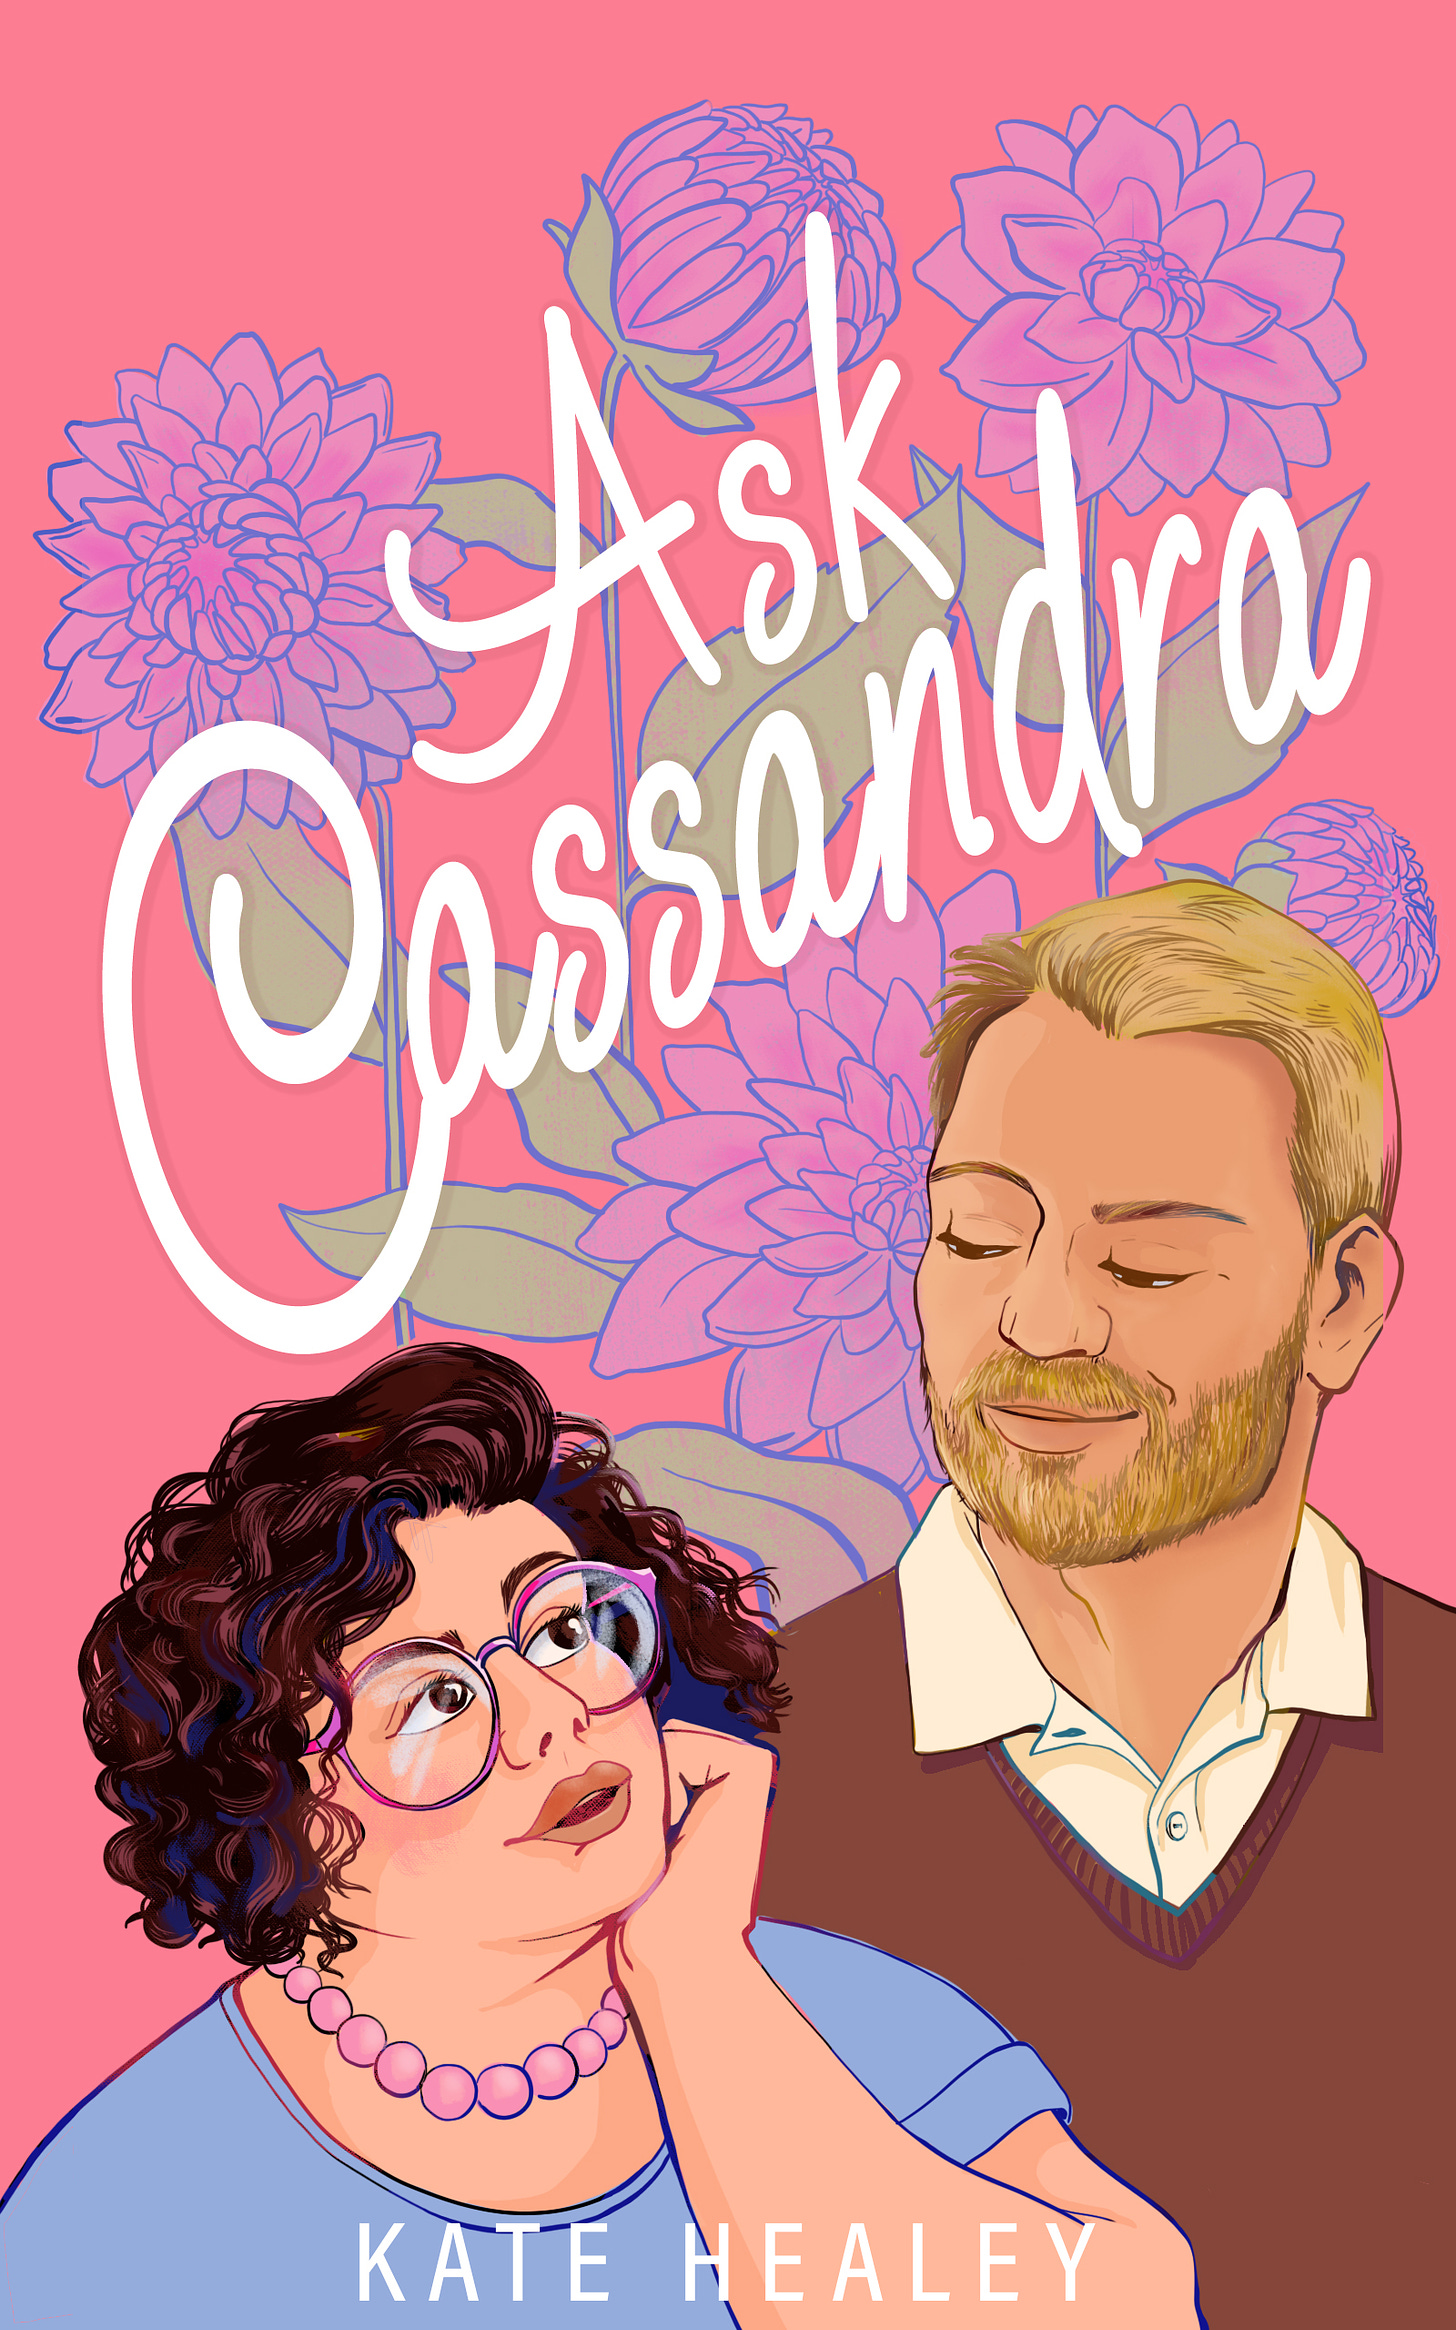 Cover for Ask Cassandra: Dahlias on a pink background, with a fat, pretty lady with great hair looking up at a bearded blond dude with serious Dad vibes (not a dad)